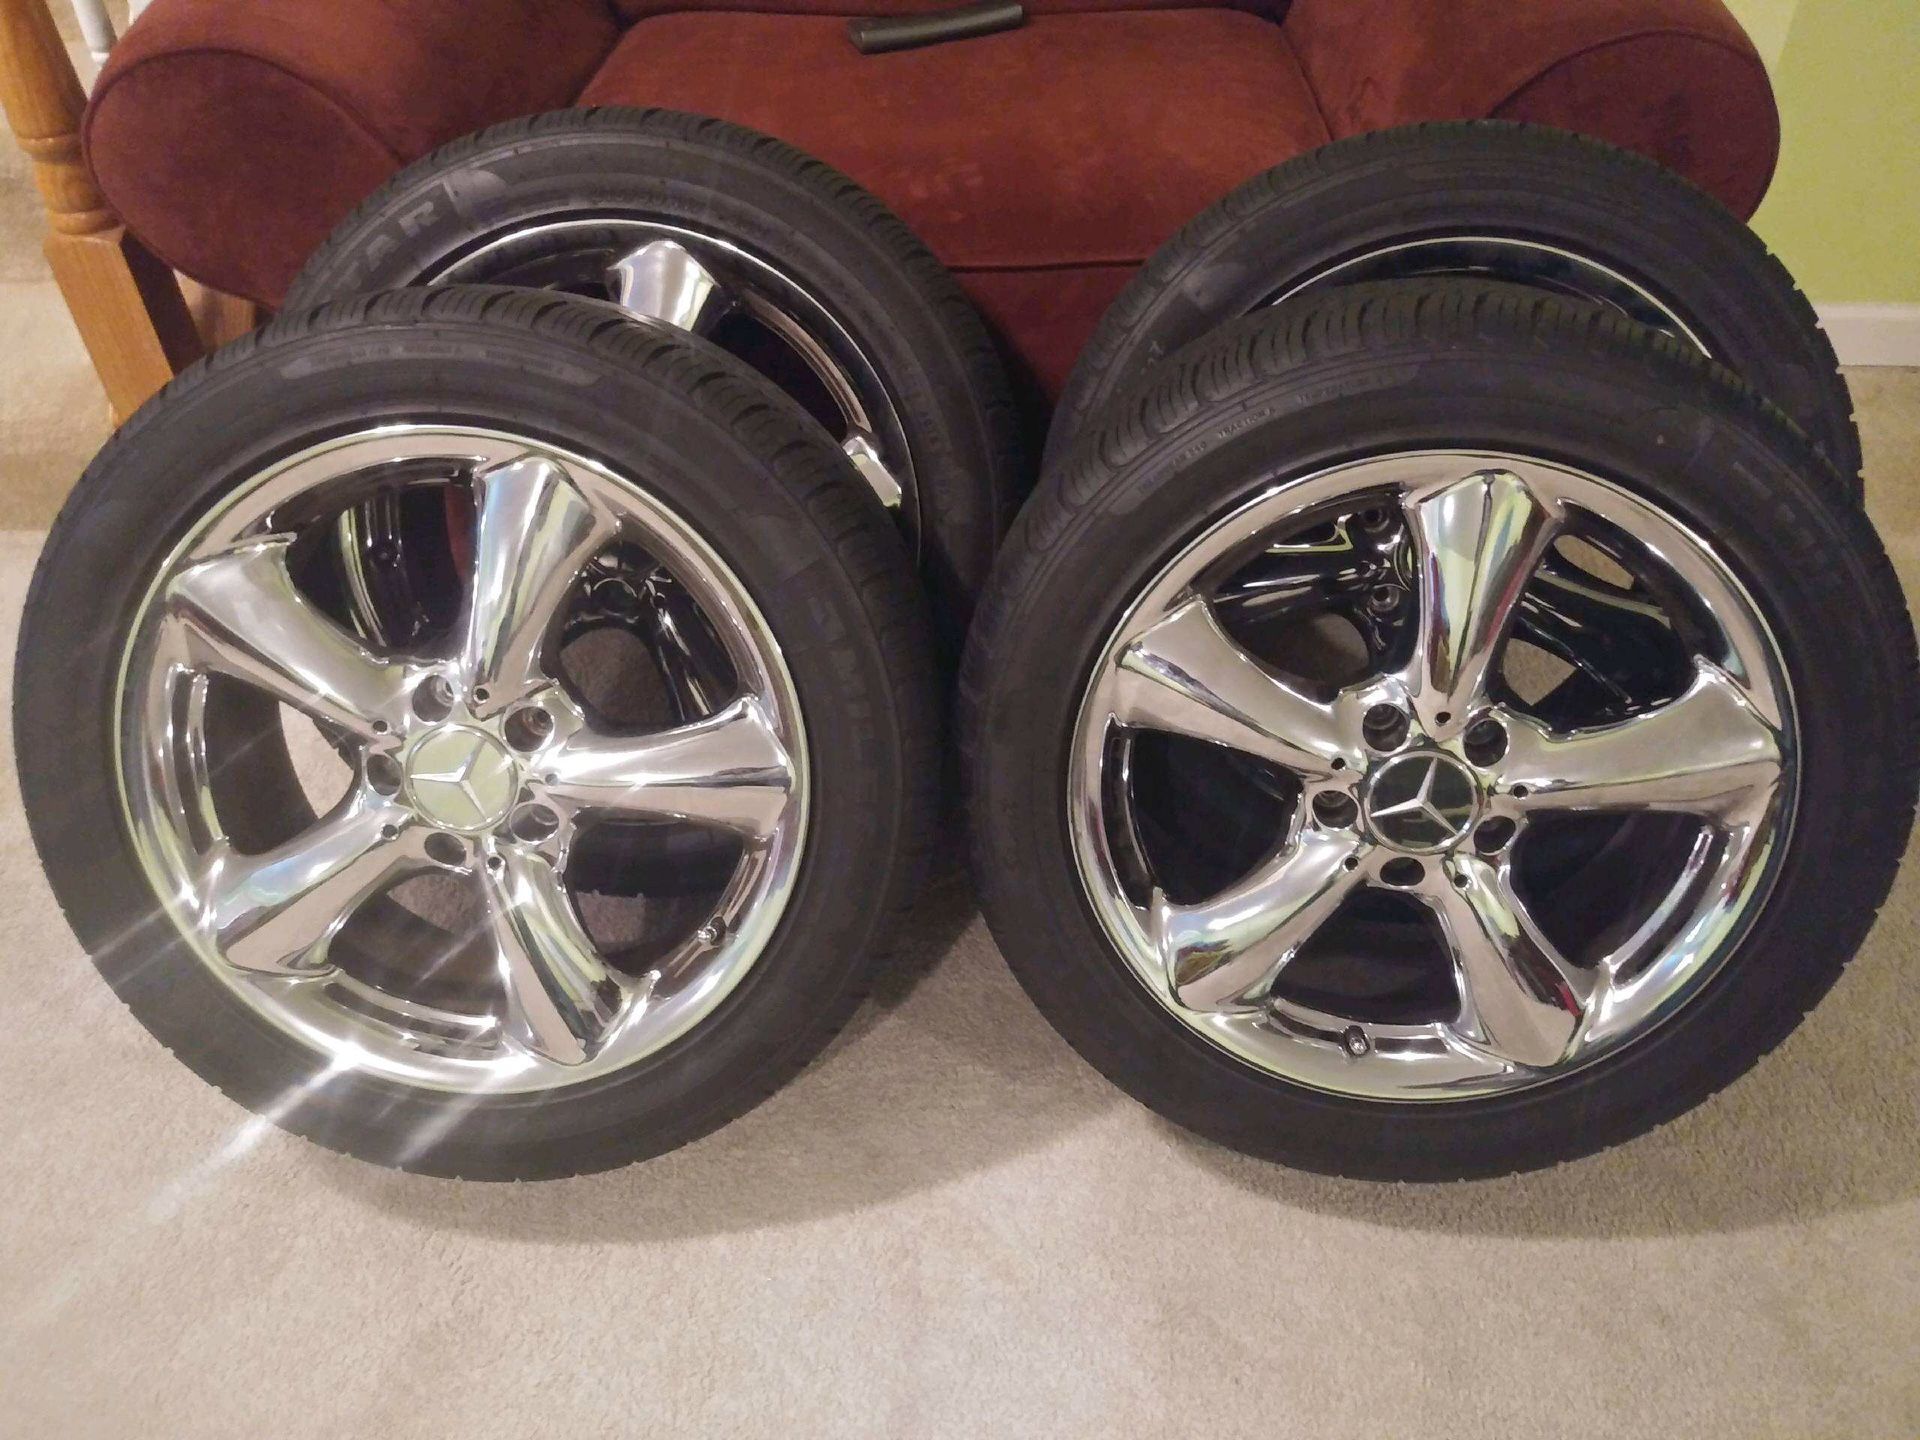 Brand New Mercedes Benz 17.5 Chrome Rims and Tires